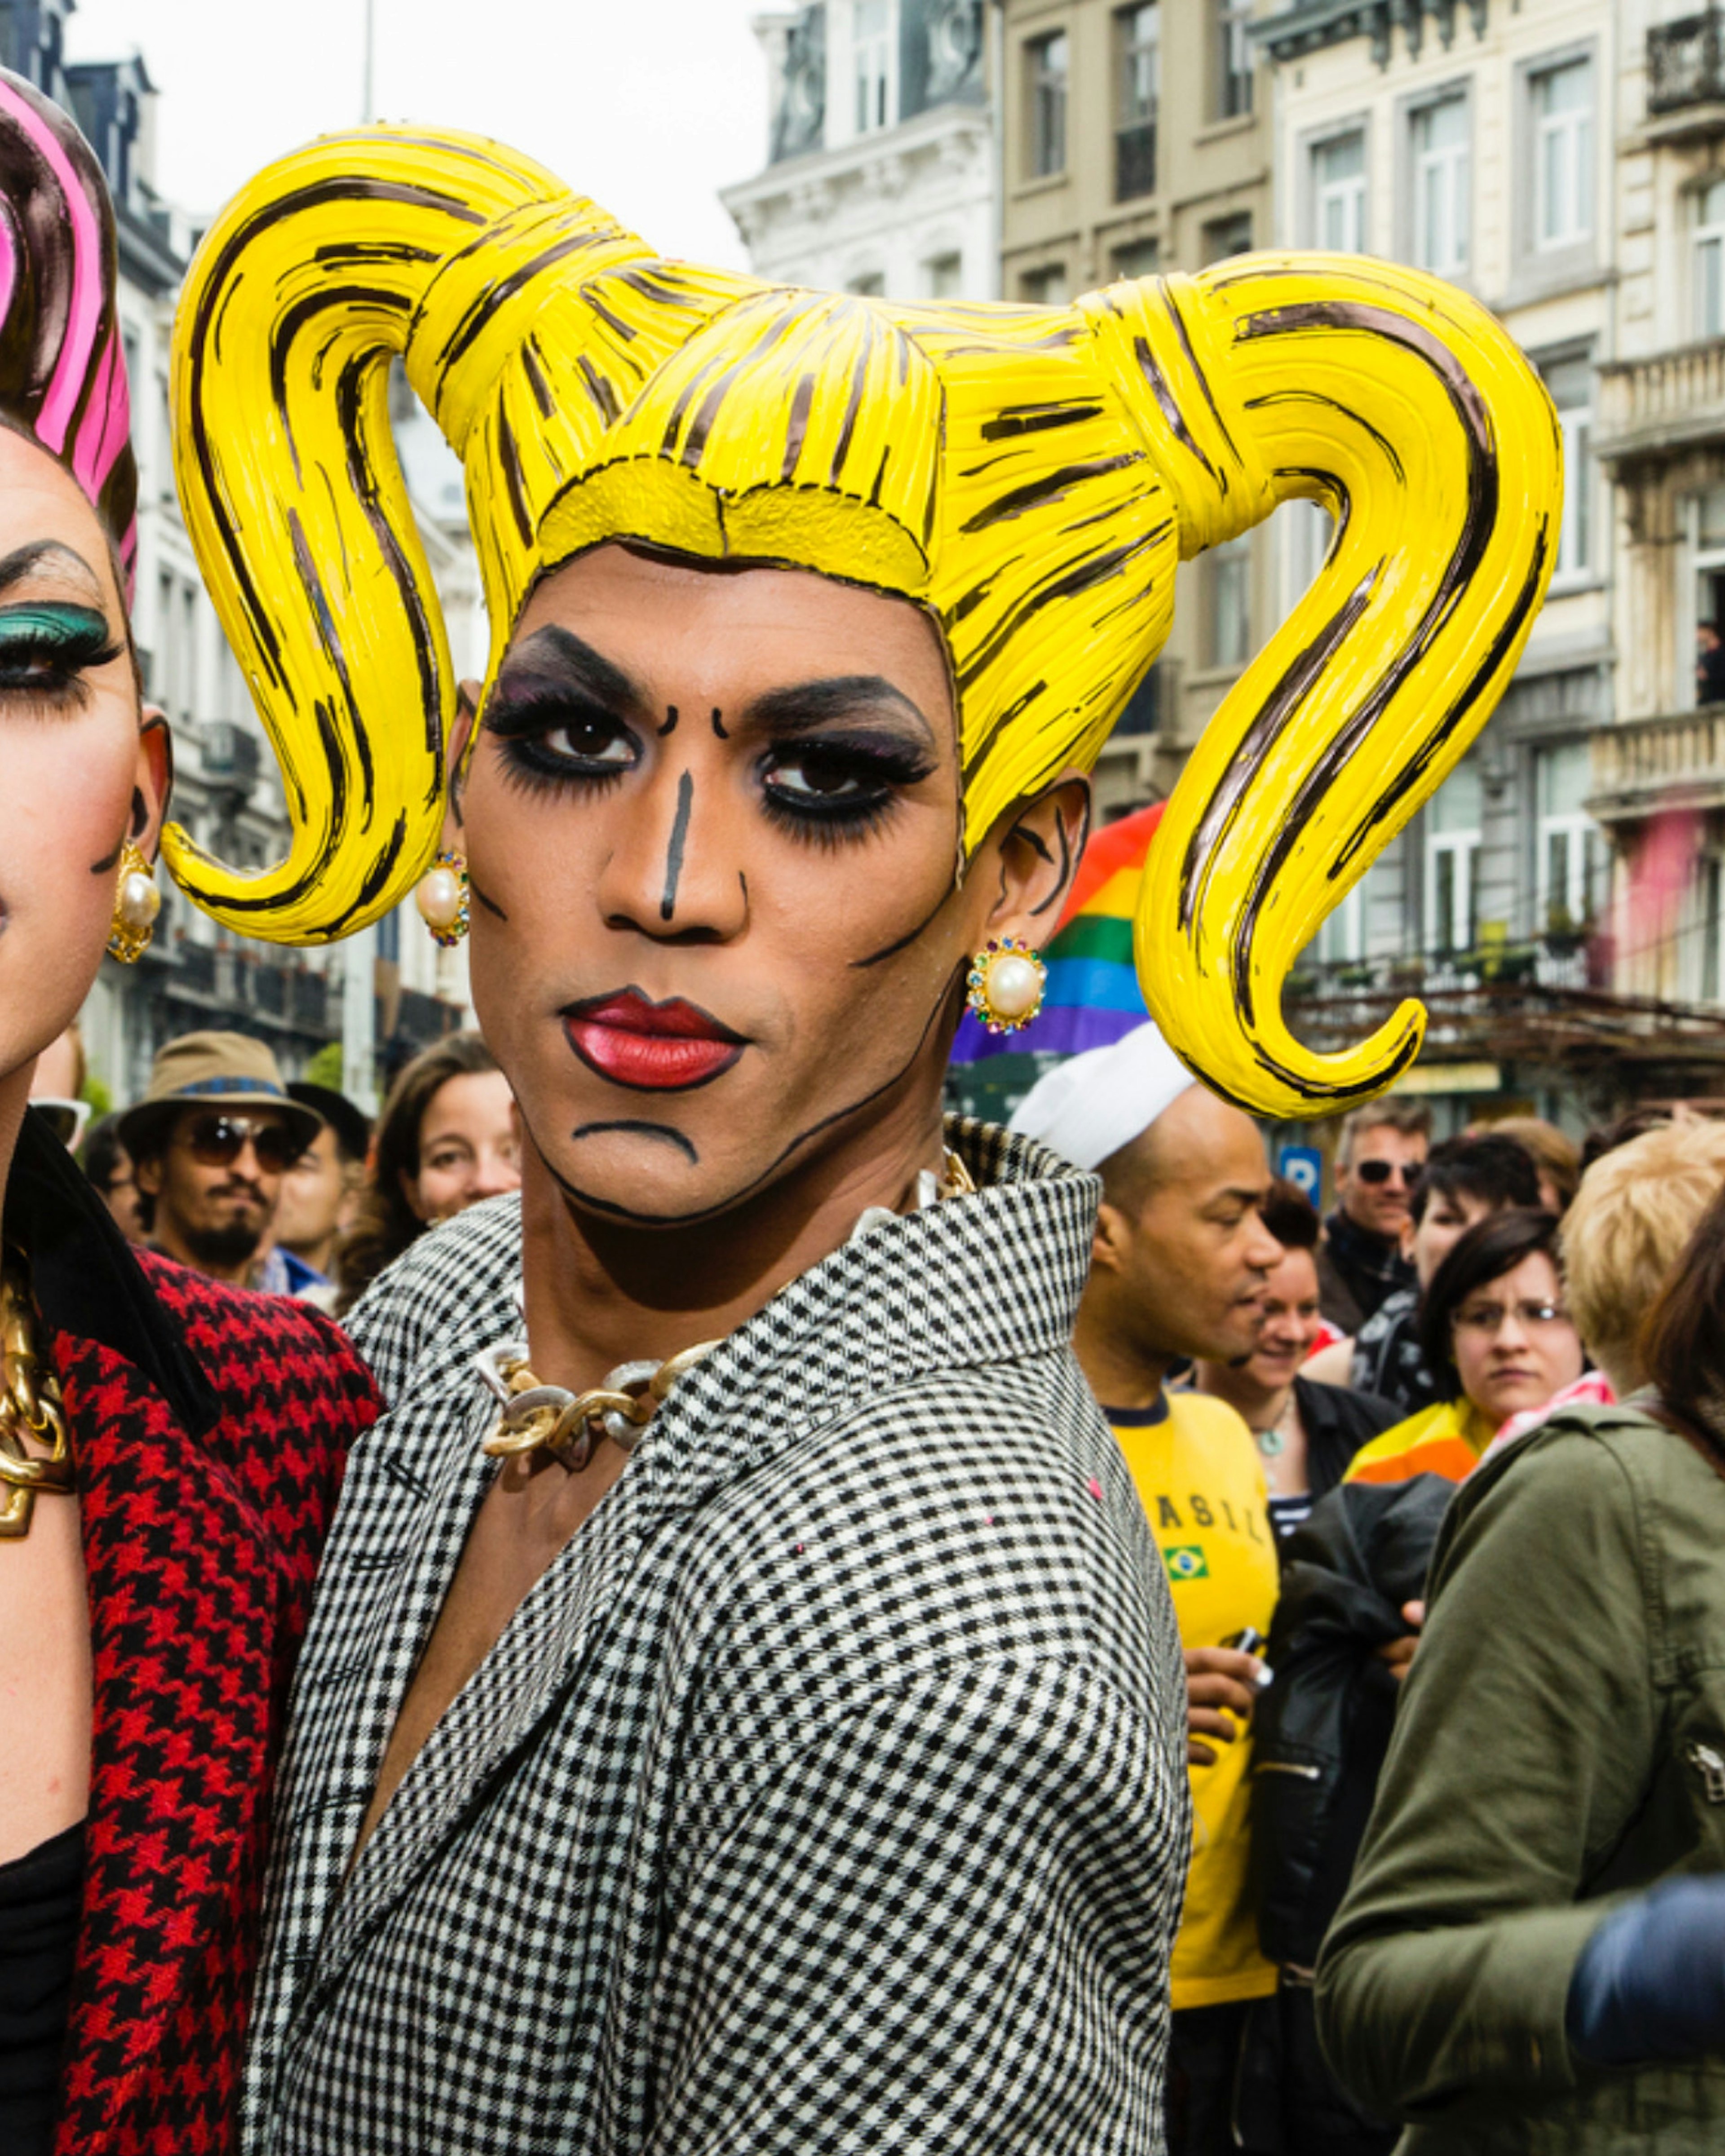 Two dressed up gay men pose in the streets of Brussels. About 80,000 participants at the Belgian Pride Parade to celebrate the LGBT (Lesbian, gay, bisexual, transgender) community and demand equal rights.